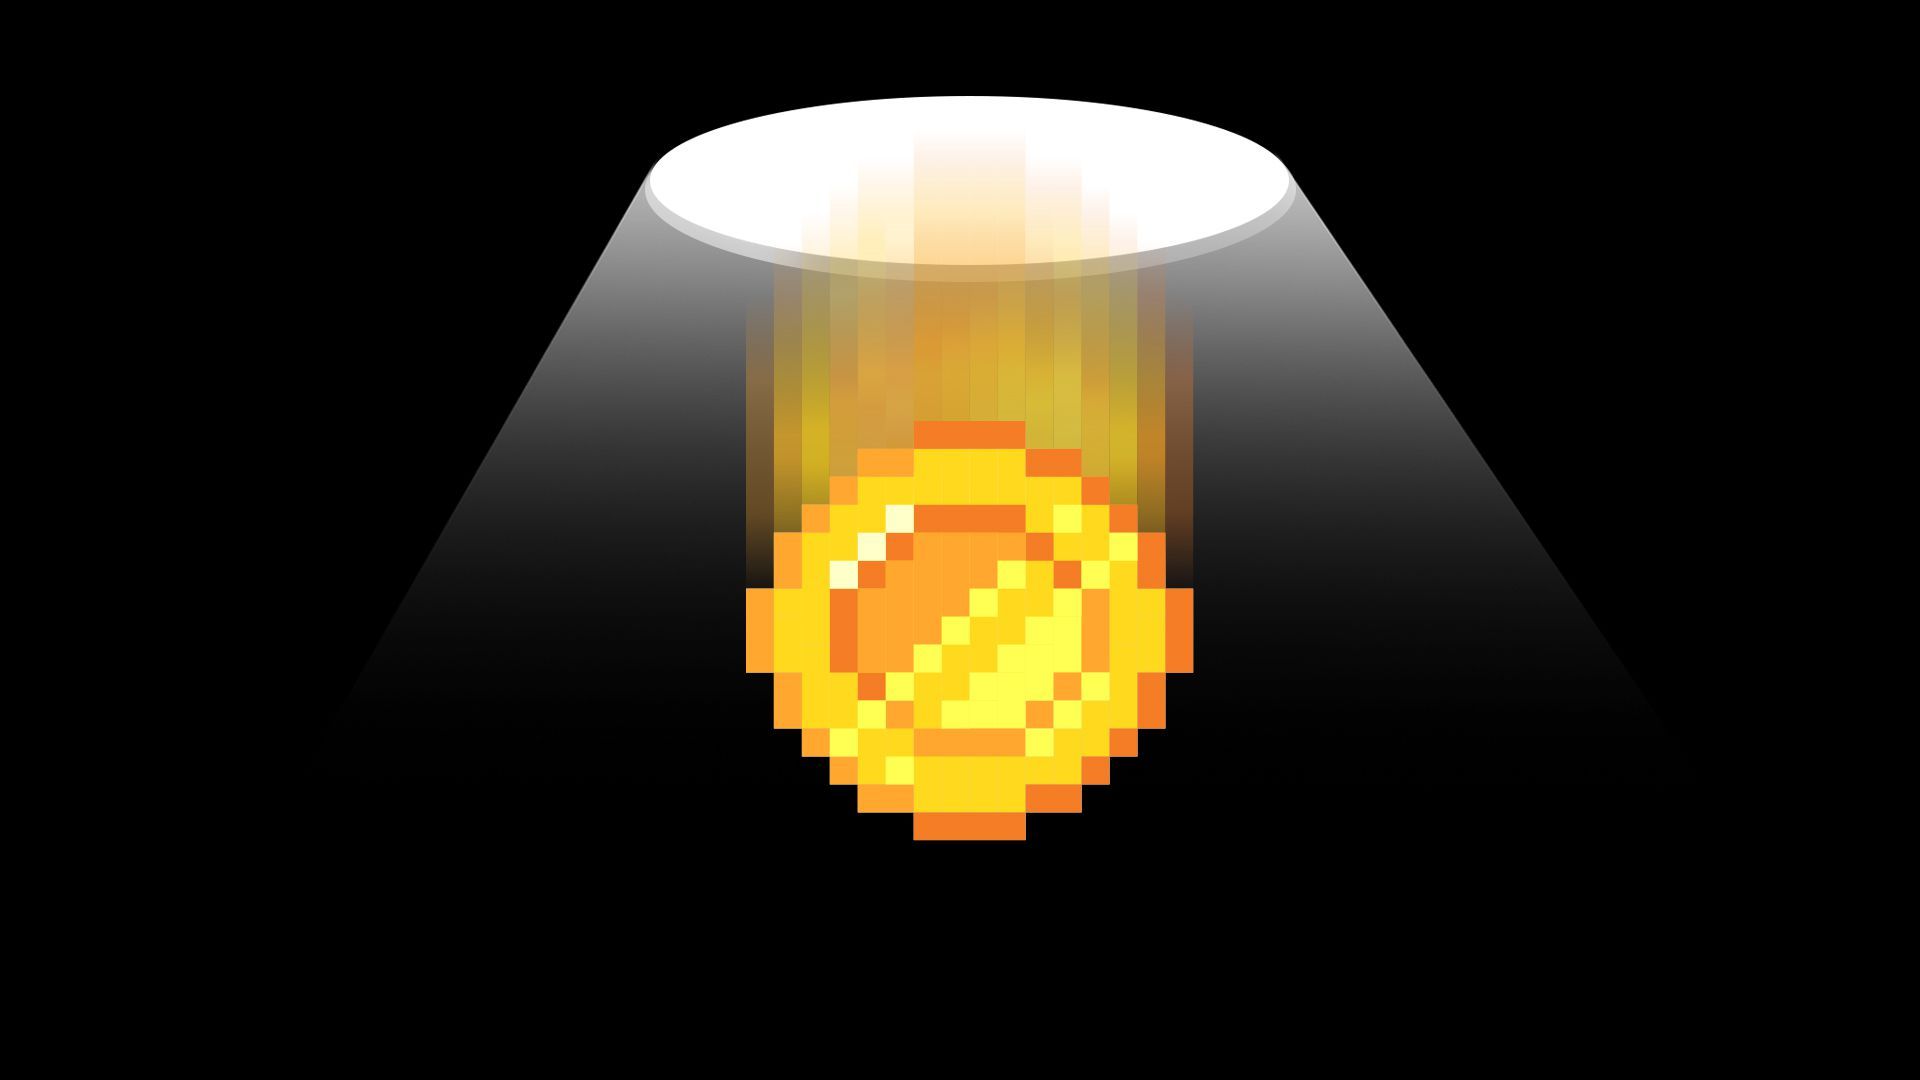 Pixelated gold coin falling through a hole above it into darkness below